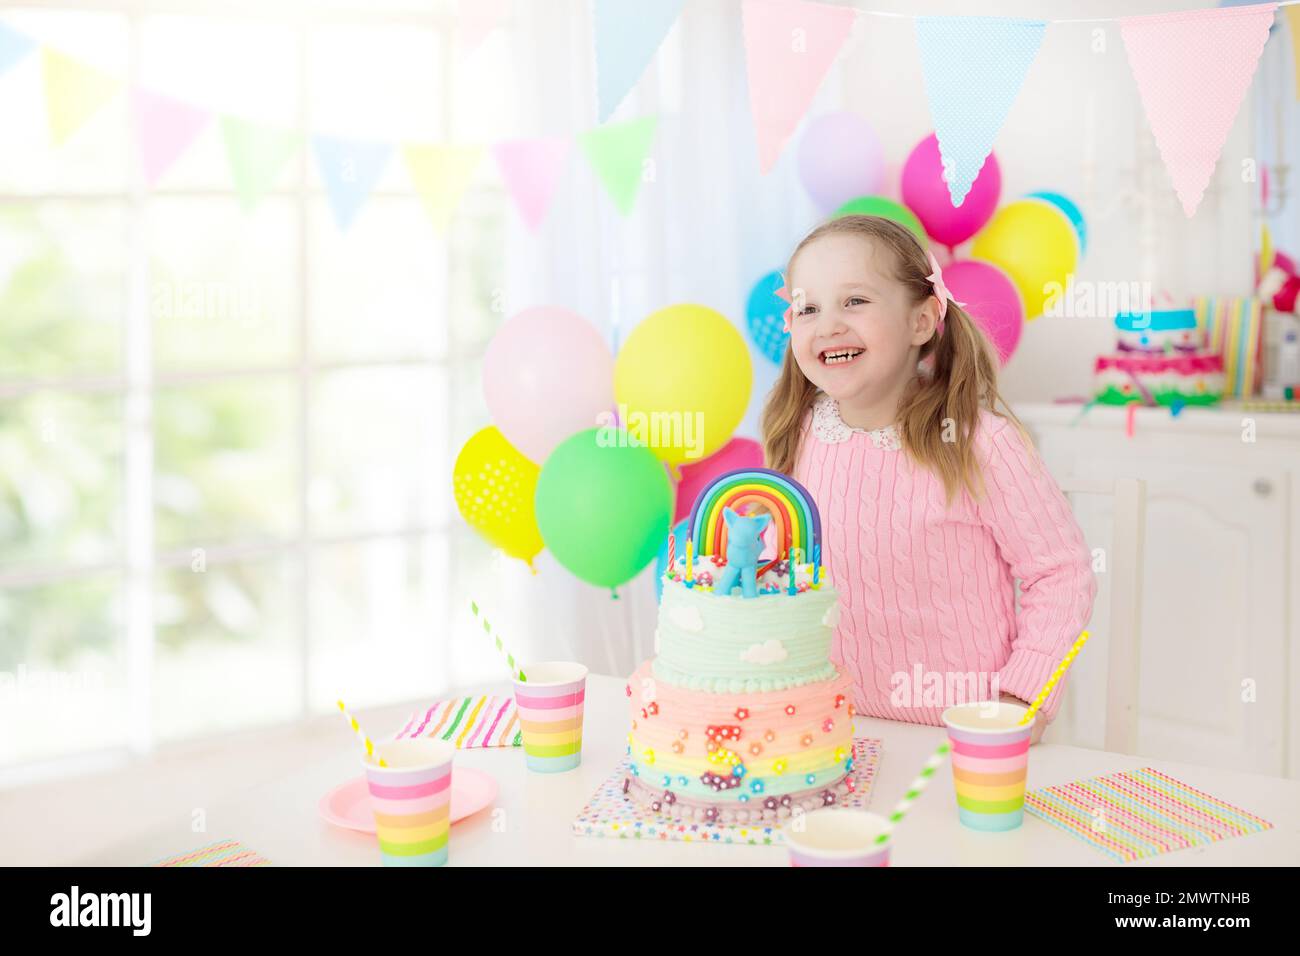 Kids birthday party with colorful pastel decoration and unicorn rainbow cake. Little girl with sweets, candy and fruit. Balloons and banner Stock Photo